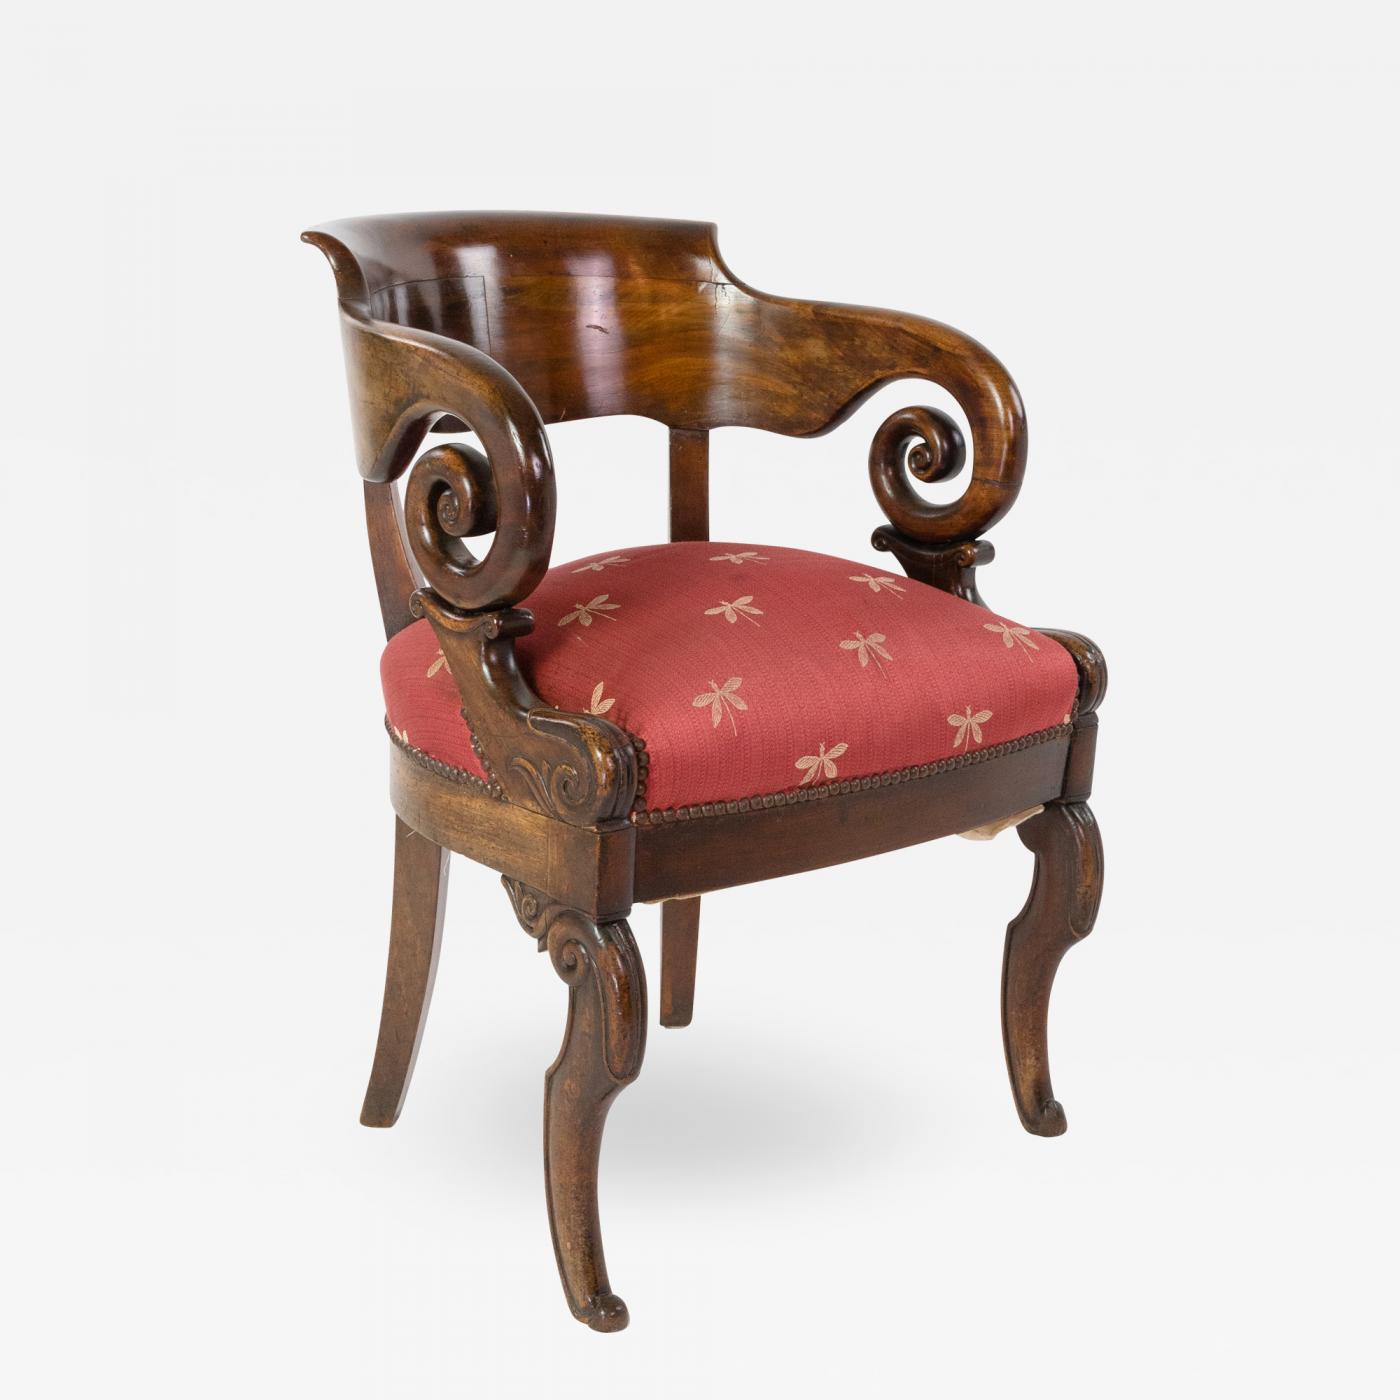 Wooden Carved Tripod Chair with Leather Seat, 1890s